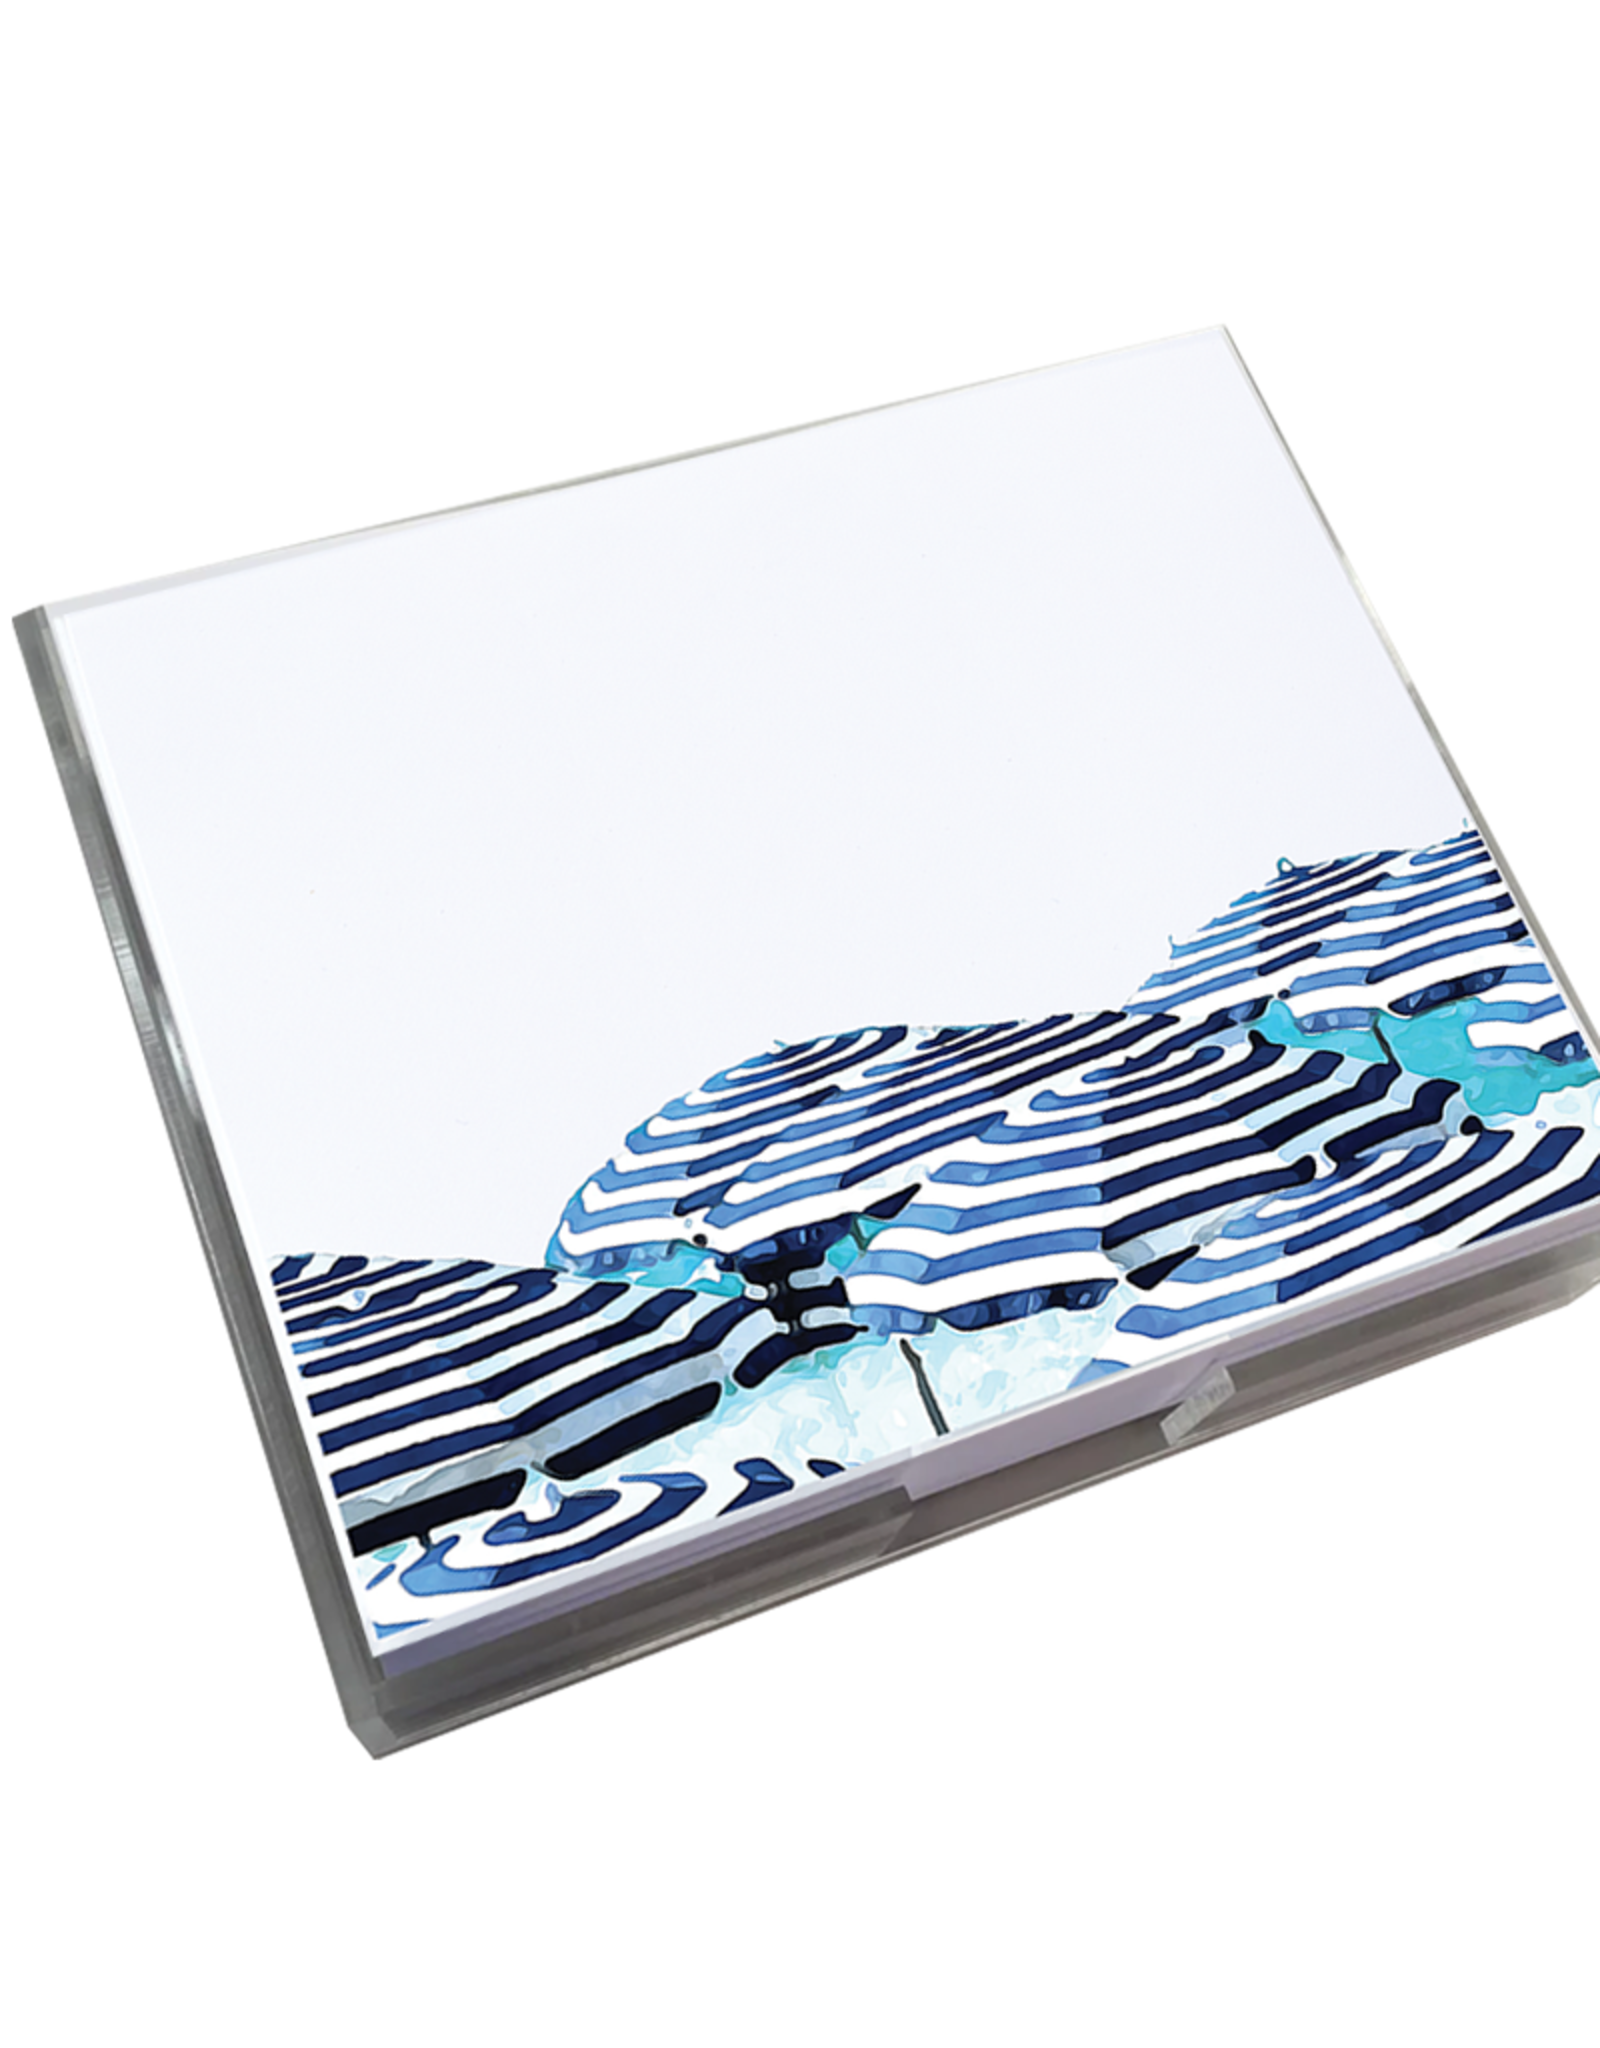 Black Ink Notepads Luxe Color 8.5 x 7 Notepad | Blue Umbrellas Design